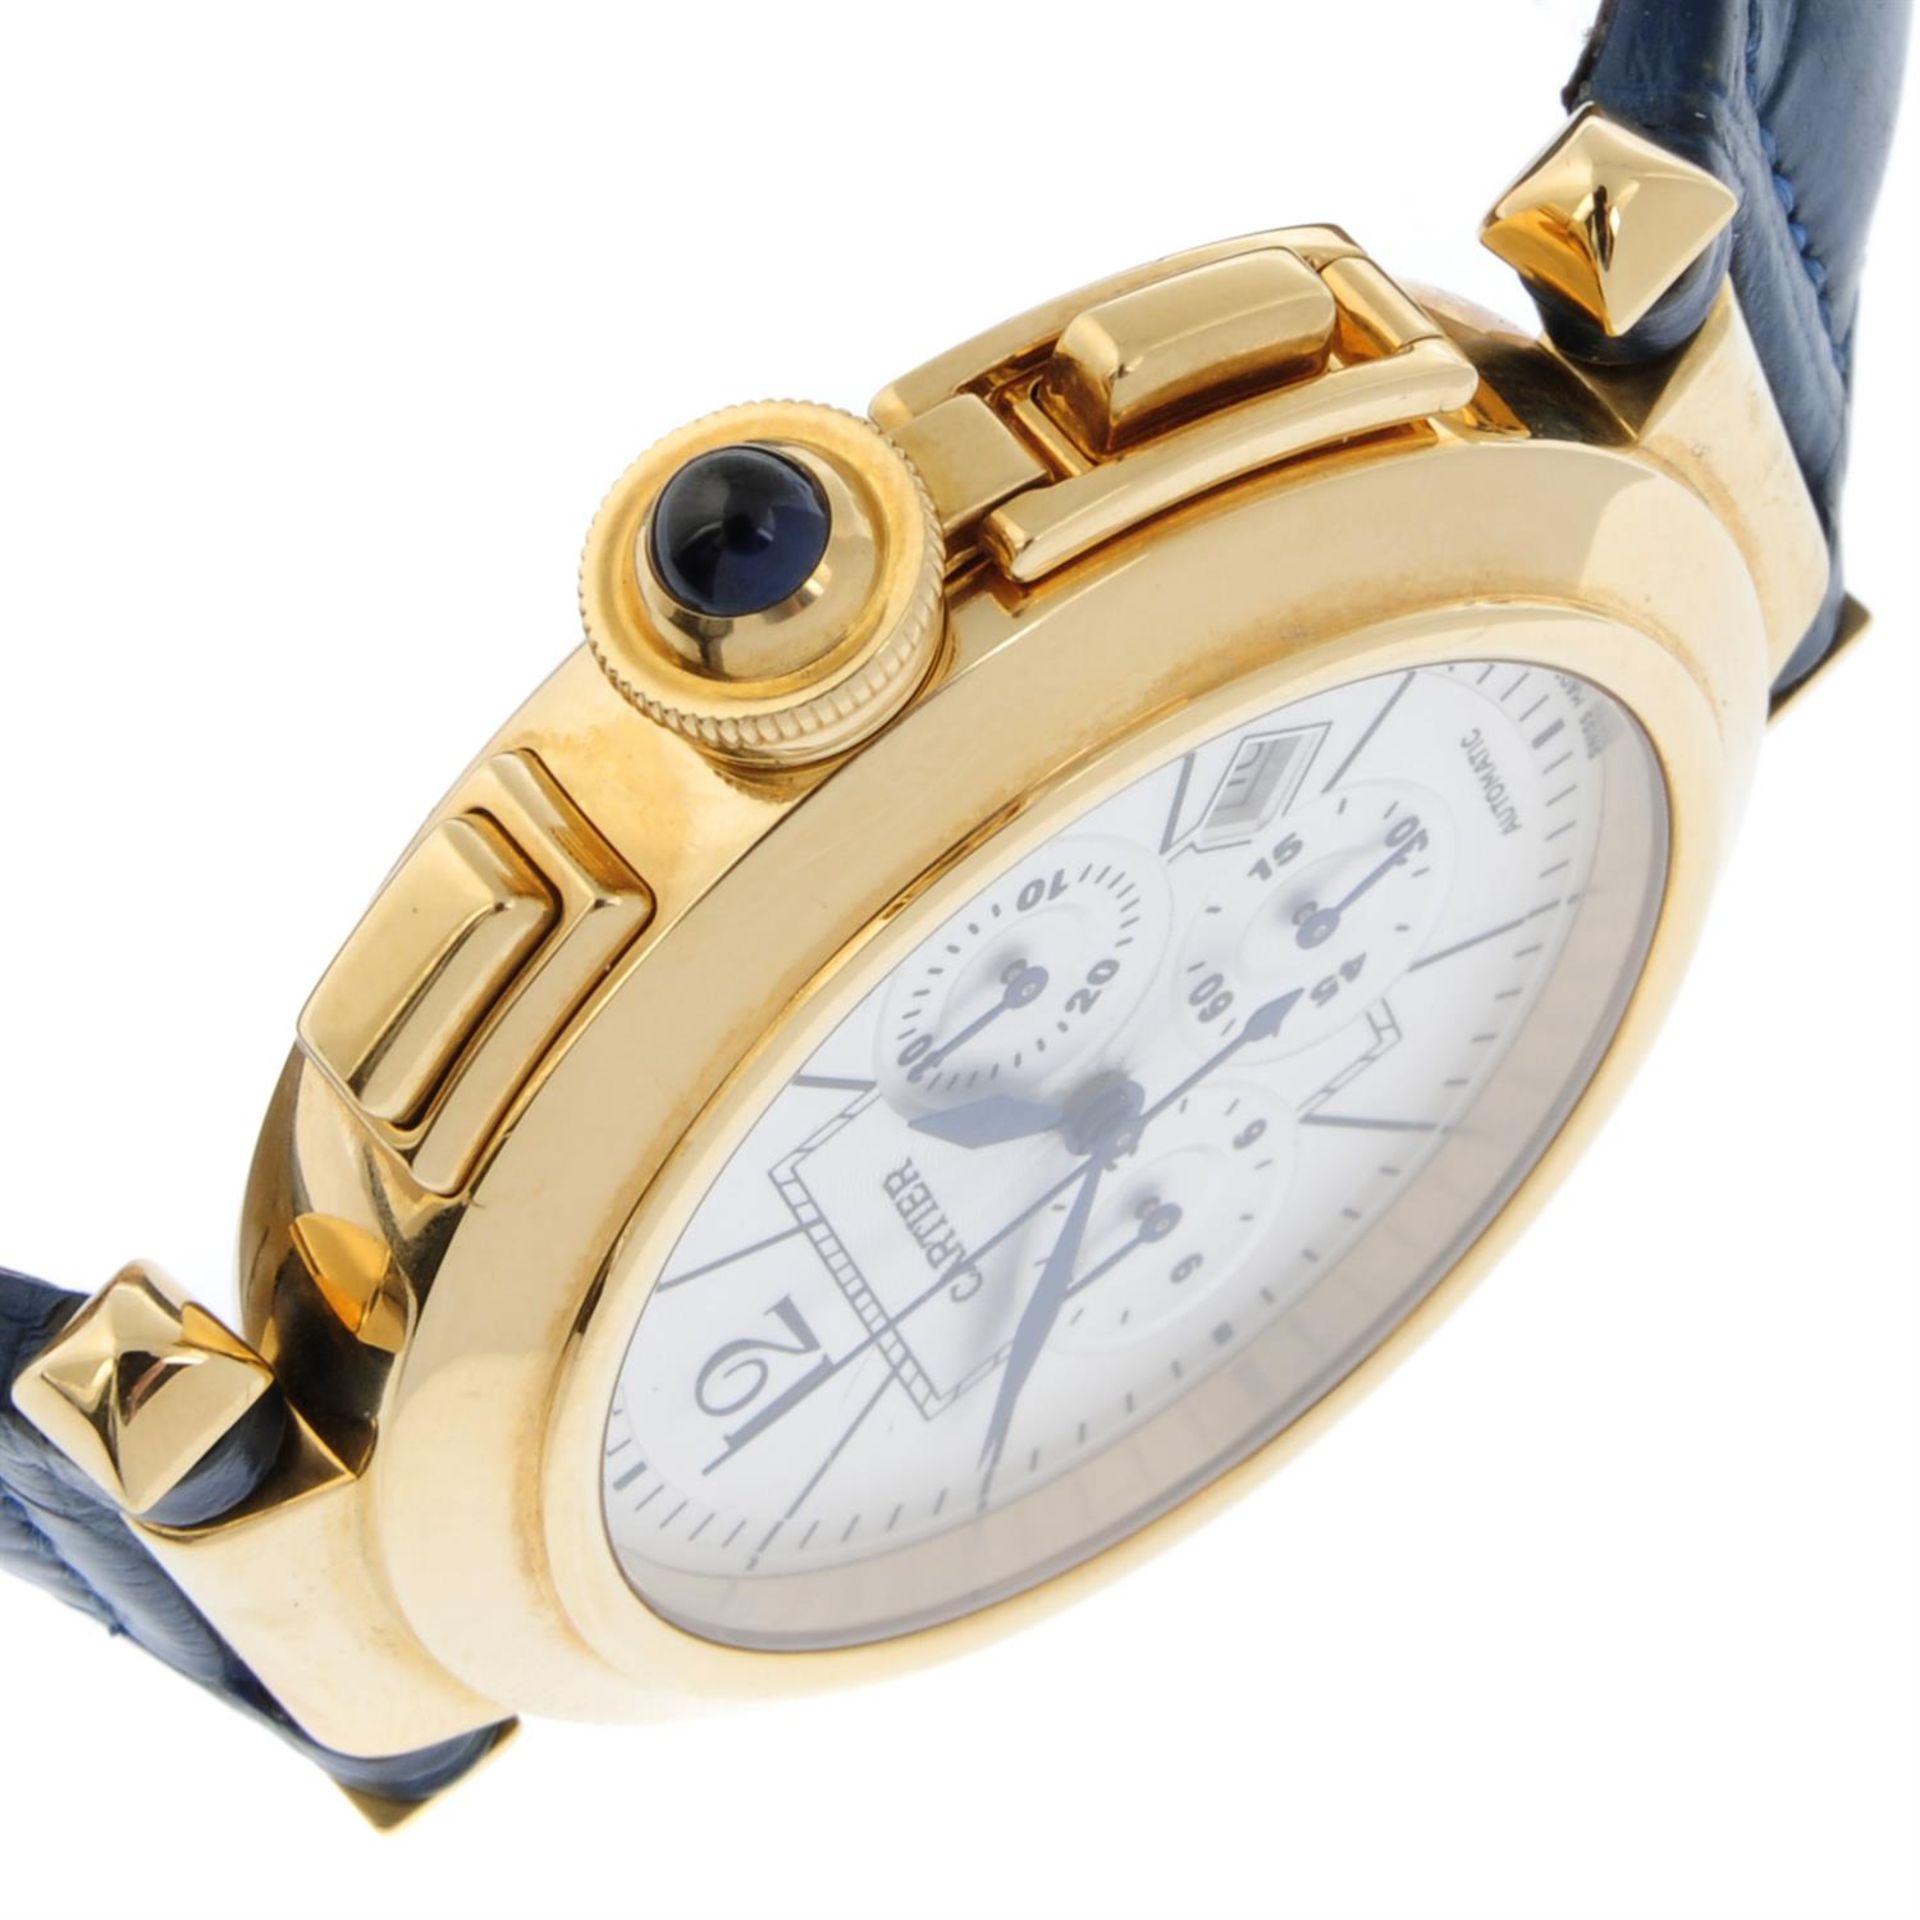 CARTIER - an 18ct yellow gold Pasha chronograph wrist watch, 42mm. - Image 3 of 6